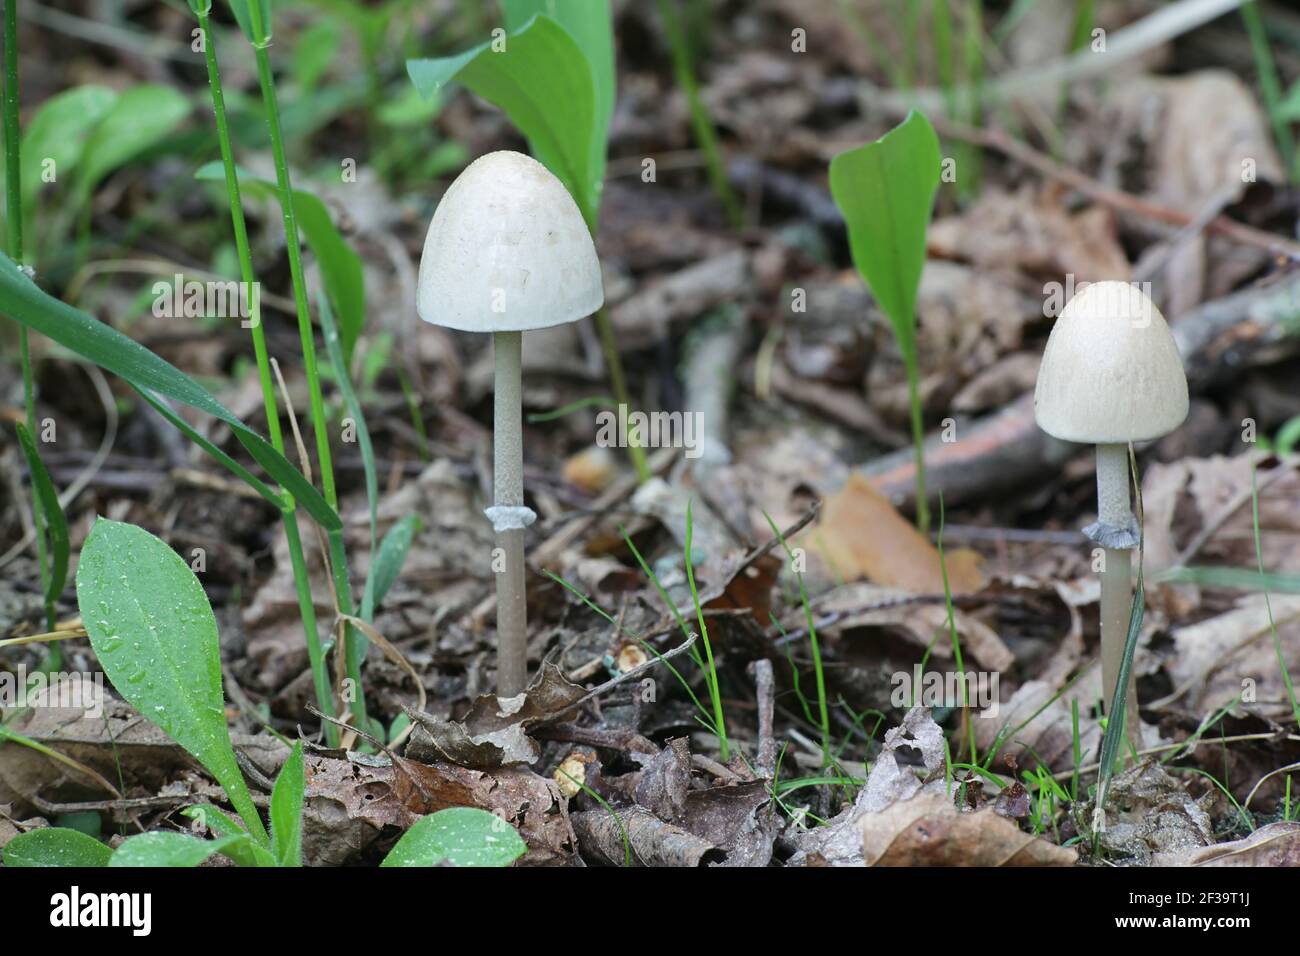 Panaeolus semiovatus, also known as Anellaria separata, commonly called the shiny mottlegill or egghead mottlegill, wild mushroom growing on dung Stock Photo